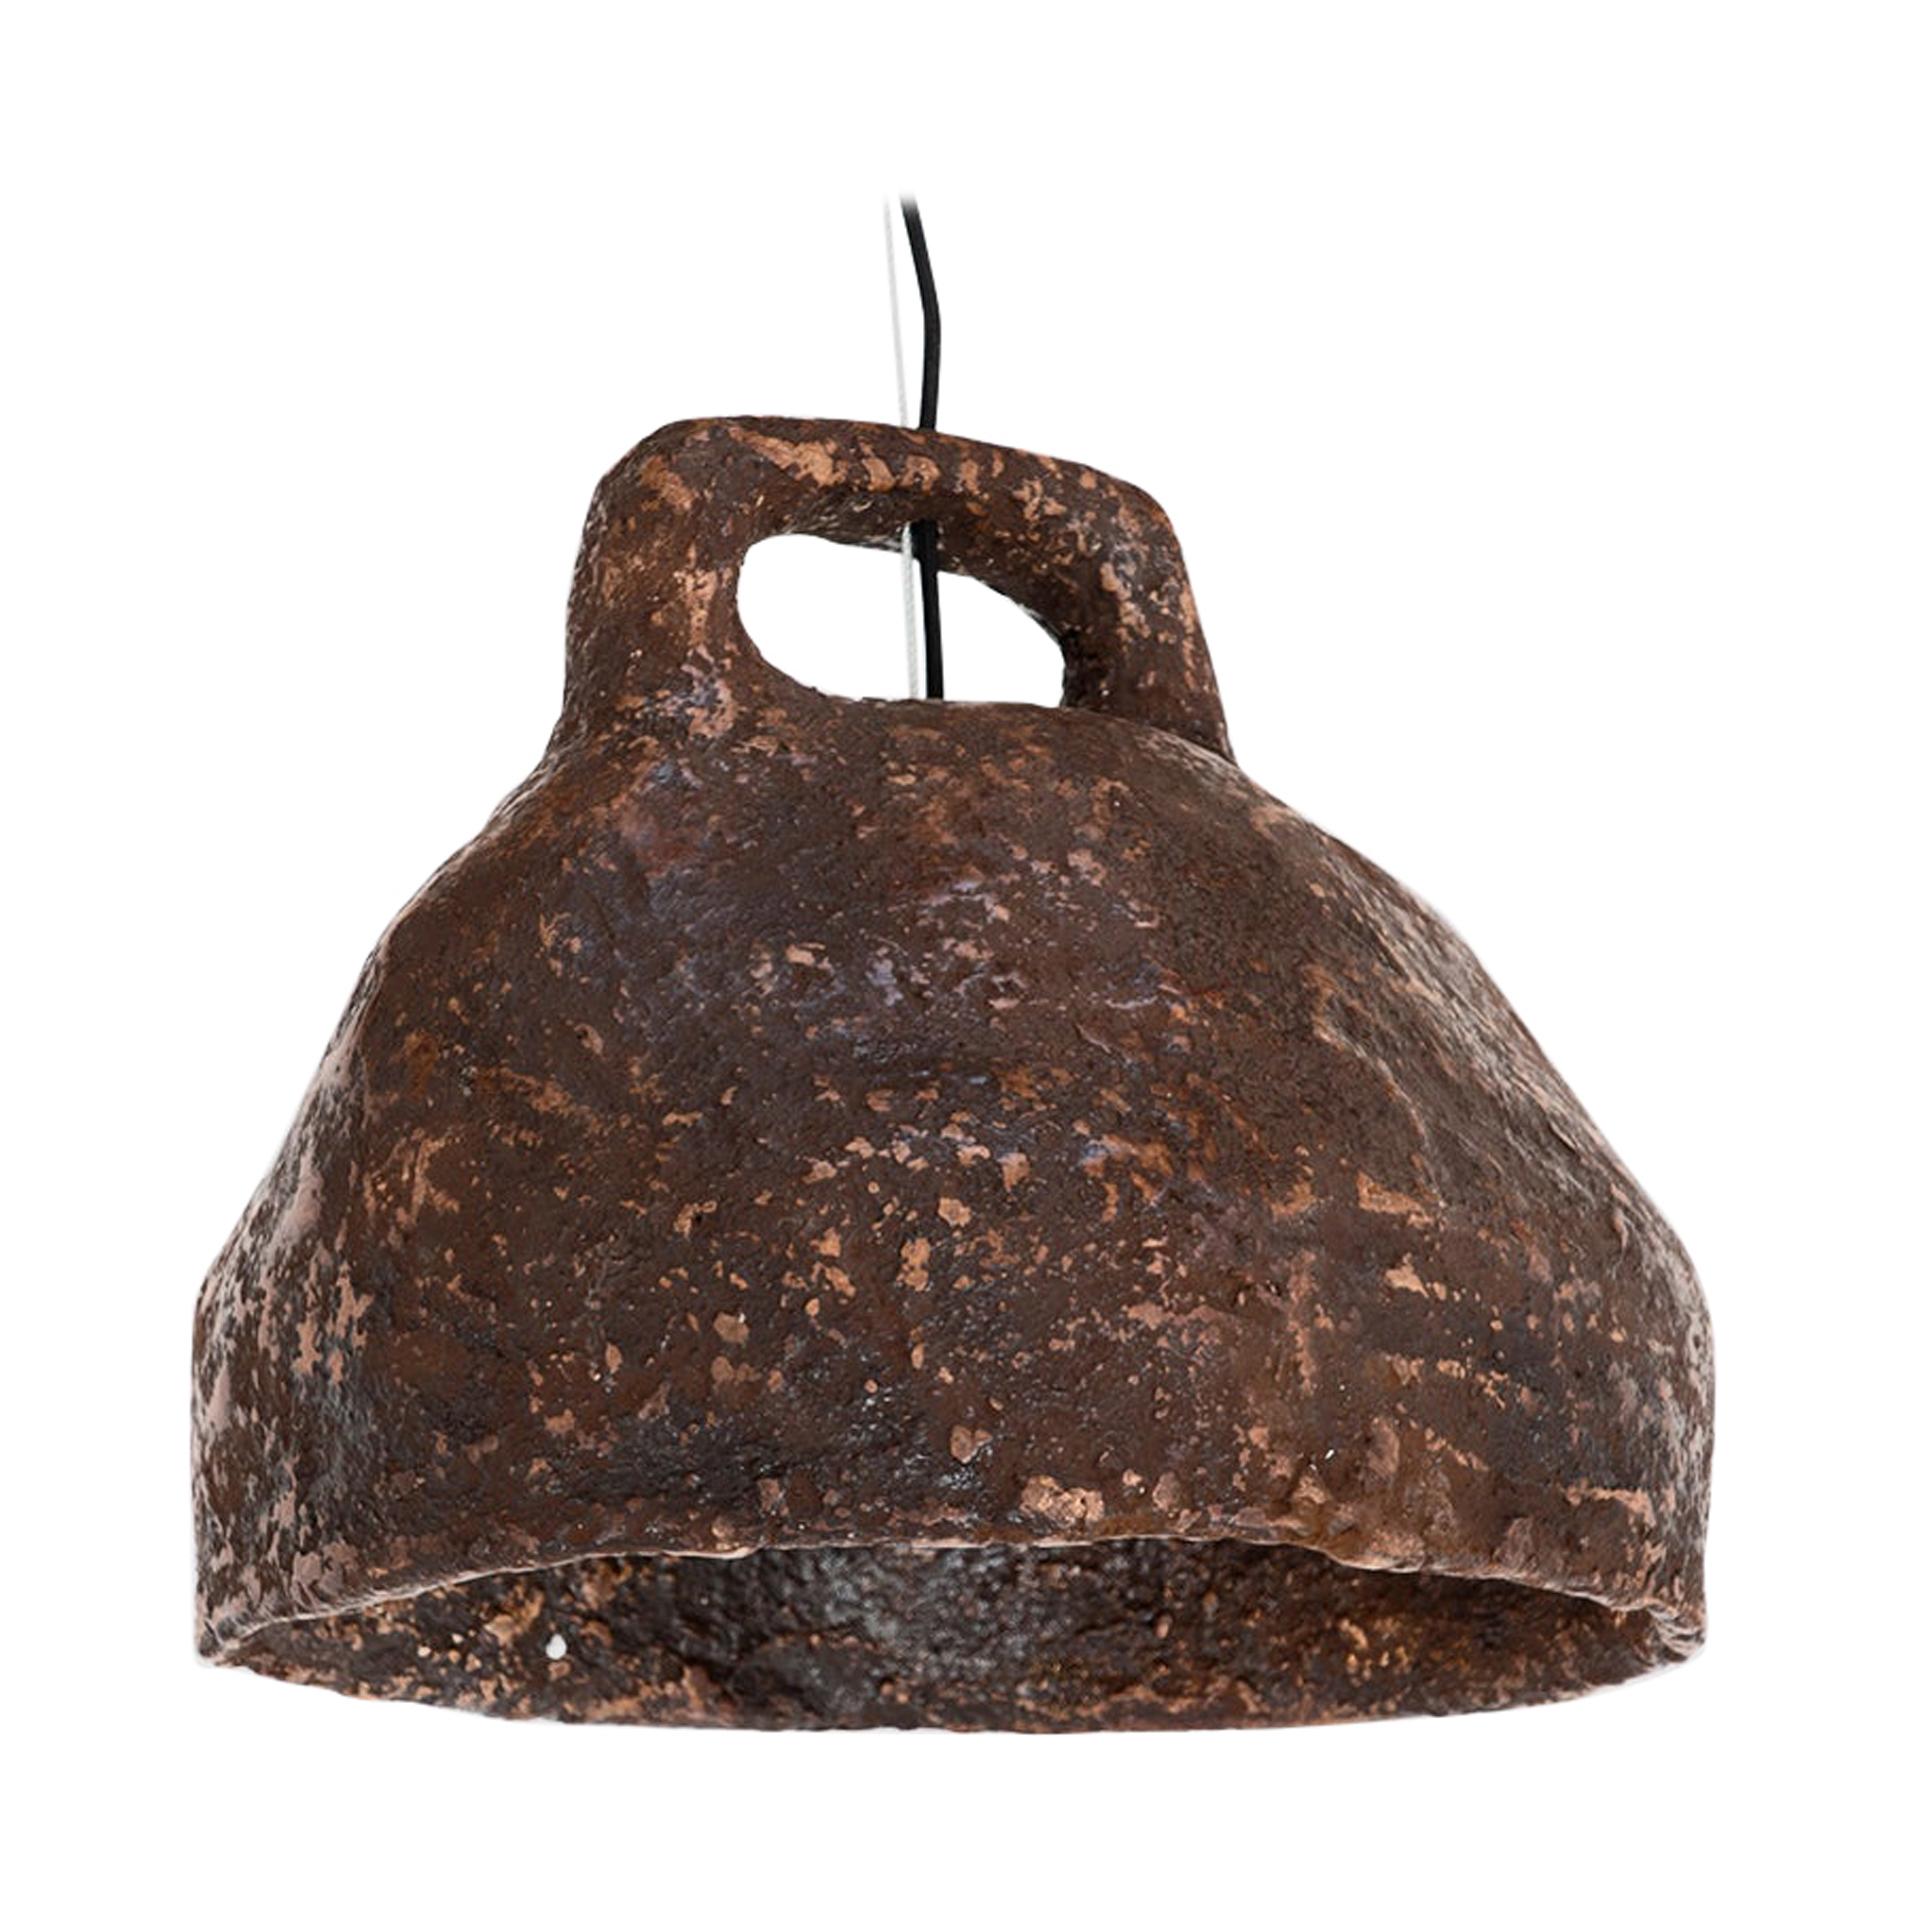 Willem Van Hooff Contemporary Clay Hanging Lamp from the Series "Dual Lamps" For Sale